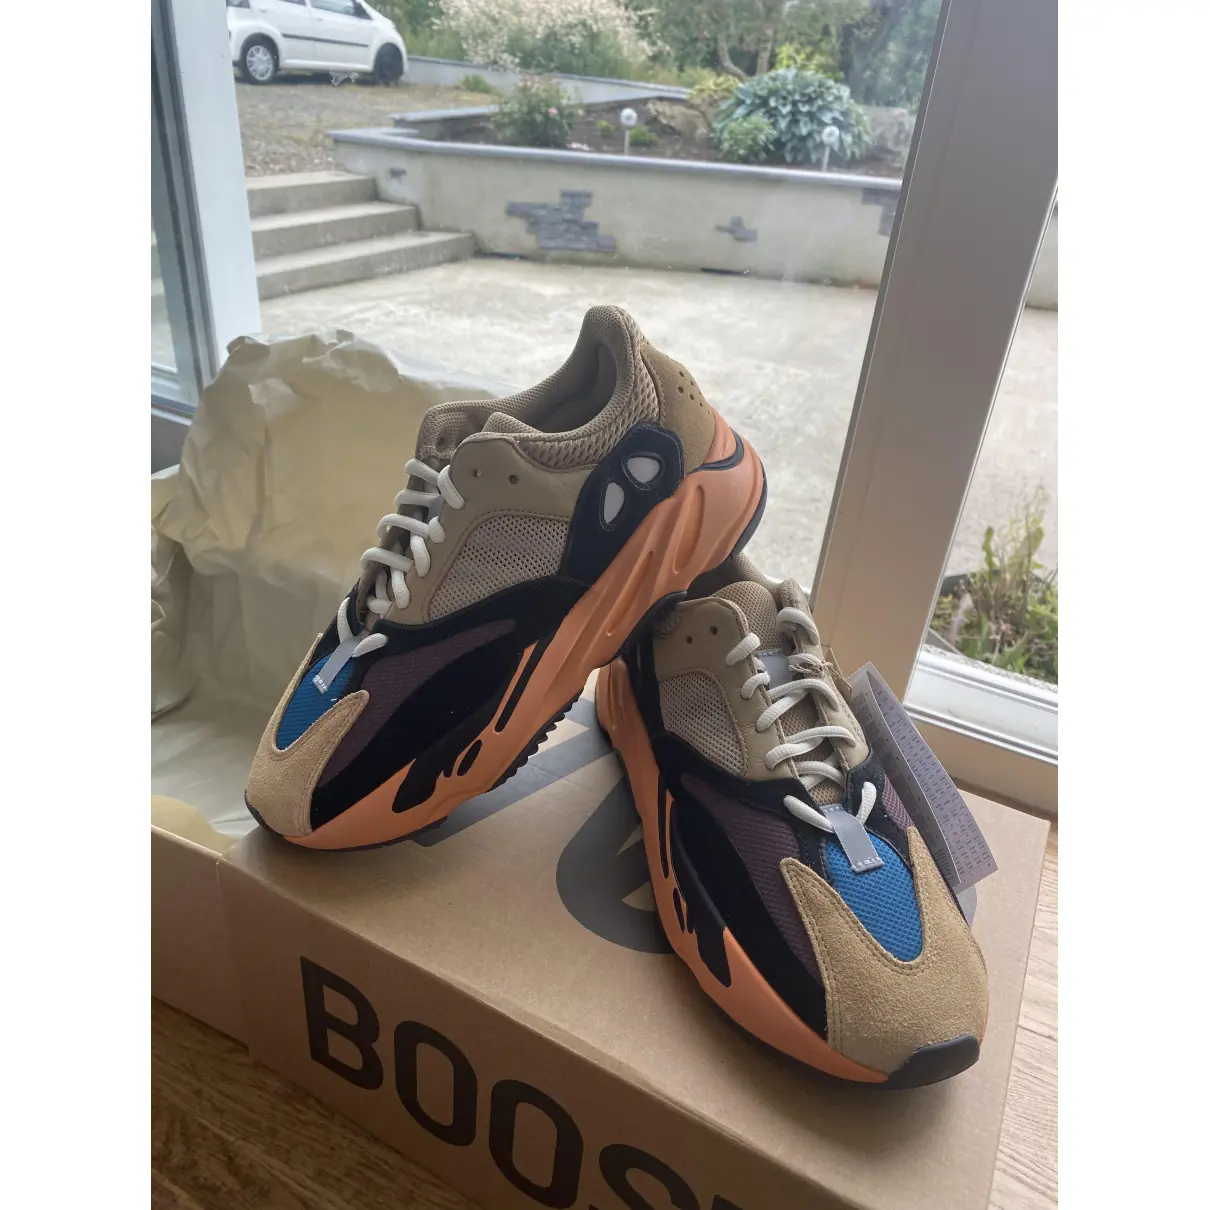 Buy Yeezy x Adidas Boost 700 V1  leather low trainers online